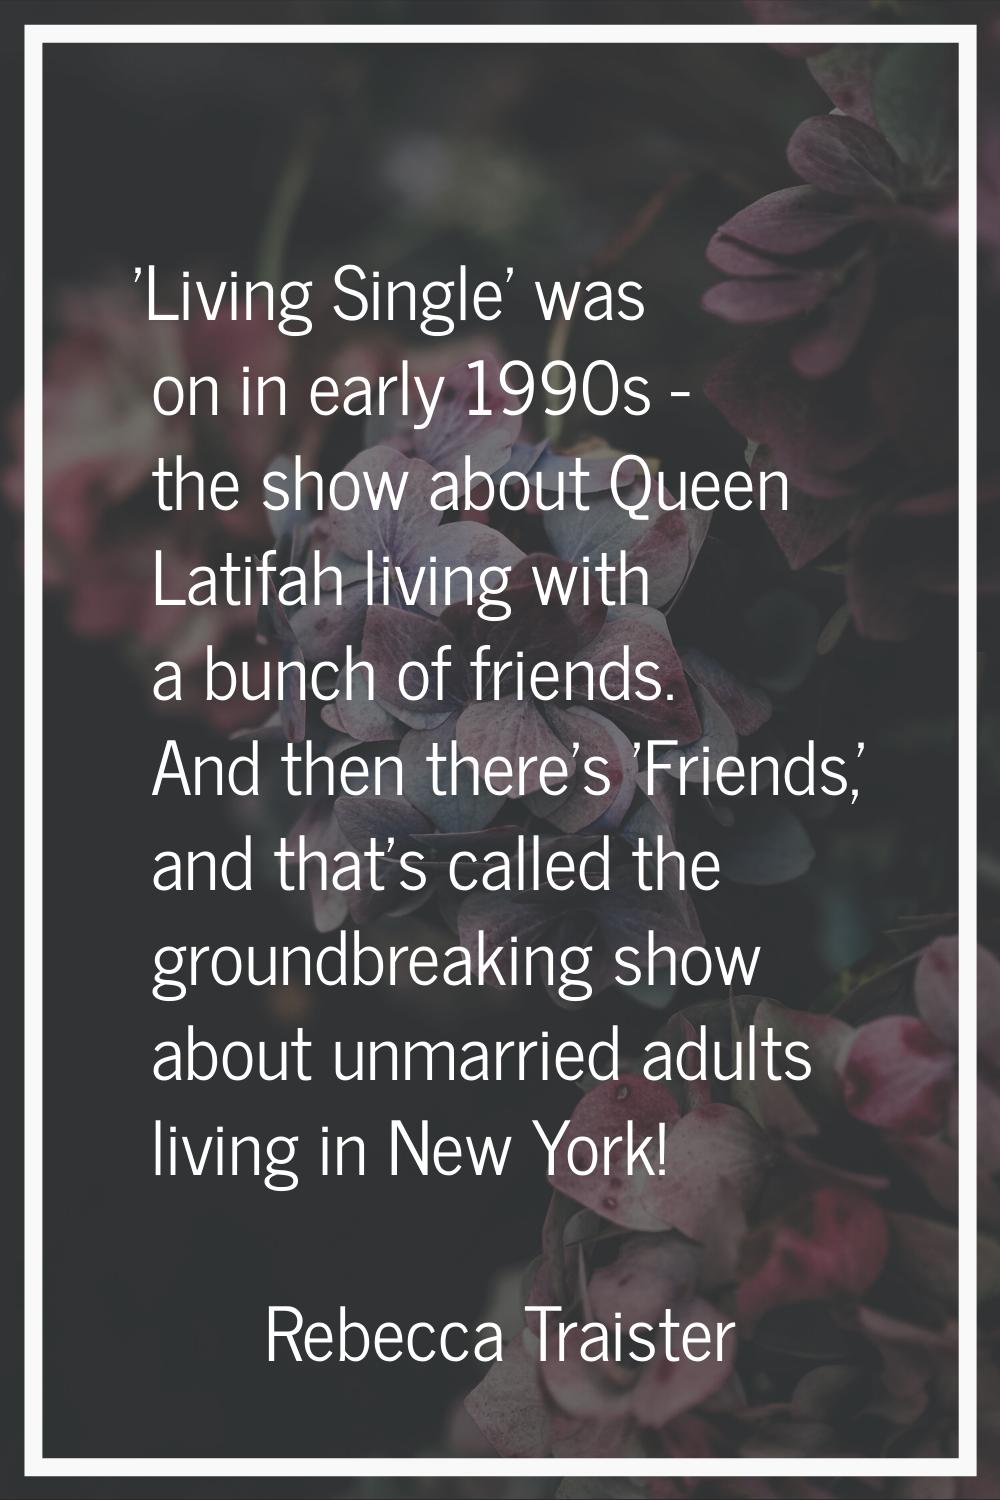 'Living Single' was on in early 1990s - the show about Queen Latifah living with a bunch of friends